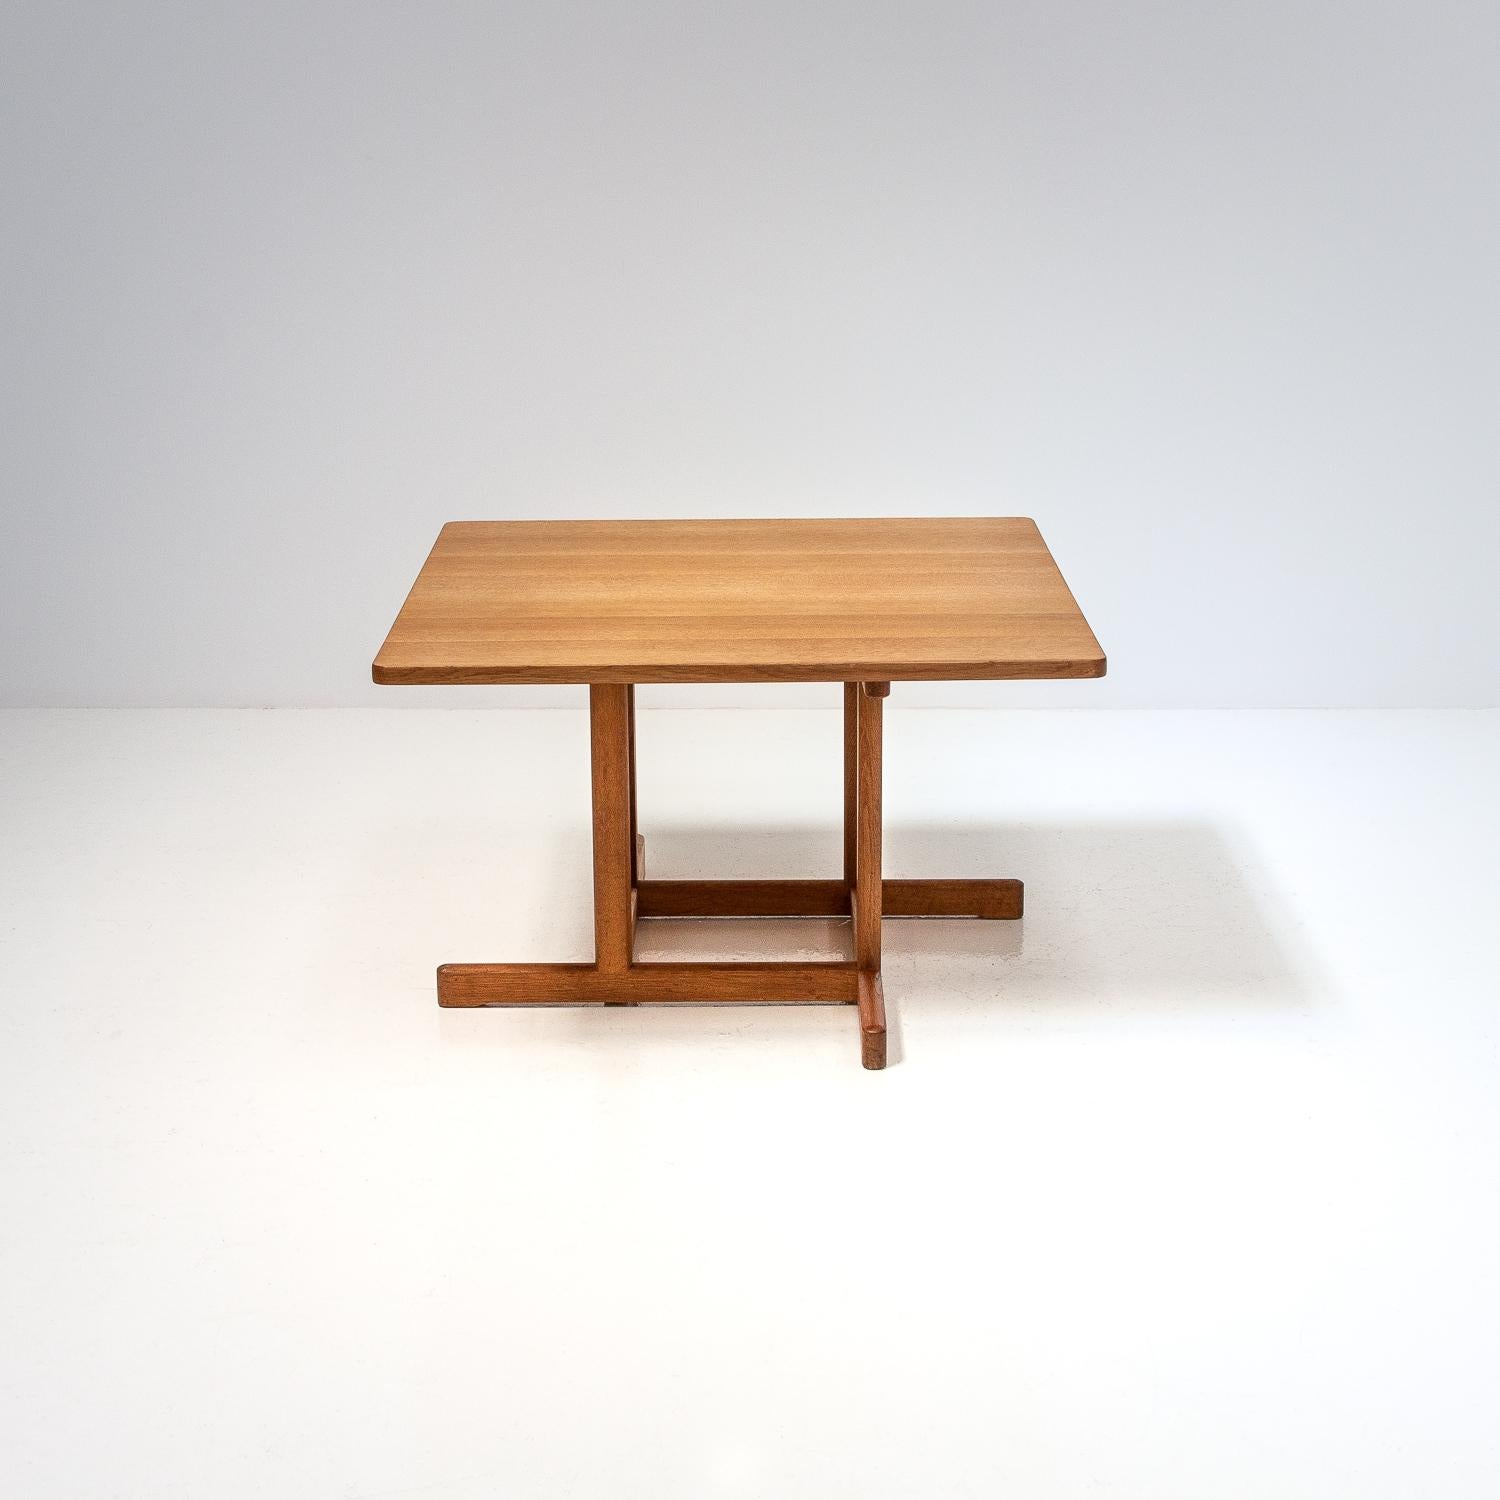 Børge Mogensen 5217 solid oak coffee table by Fredericia, Denmark, 1960s. Excellent condition with original labelling to the underside.